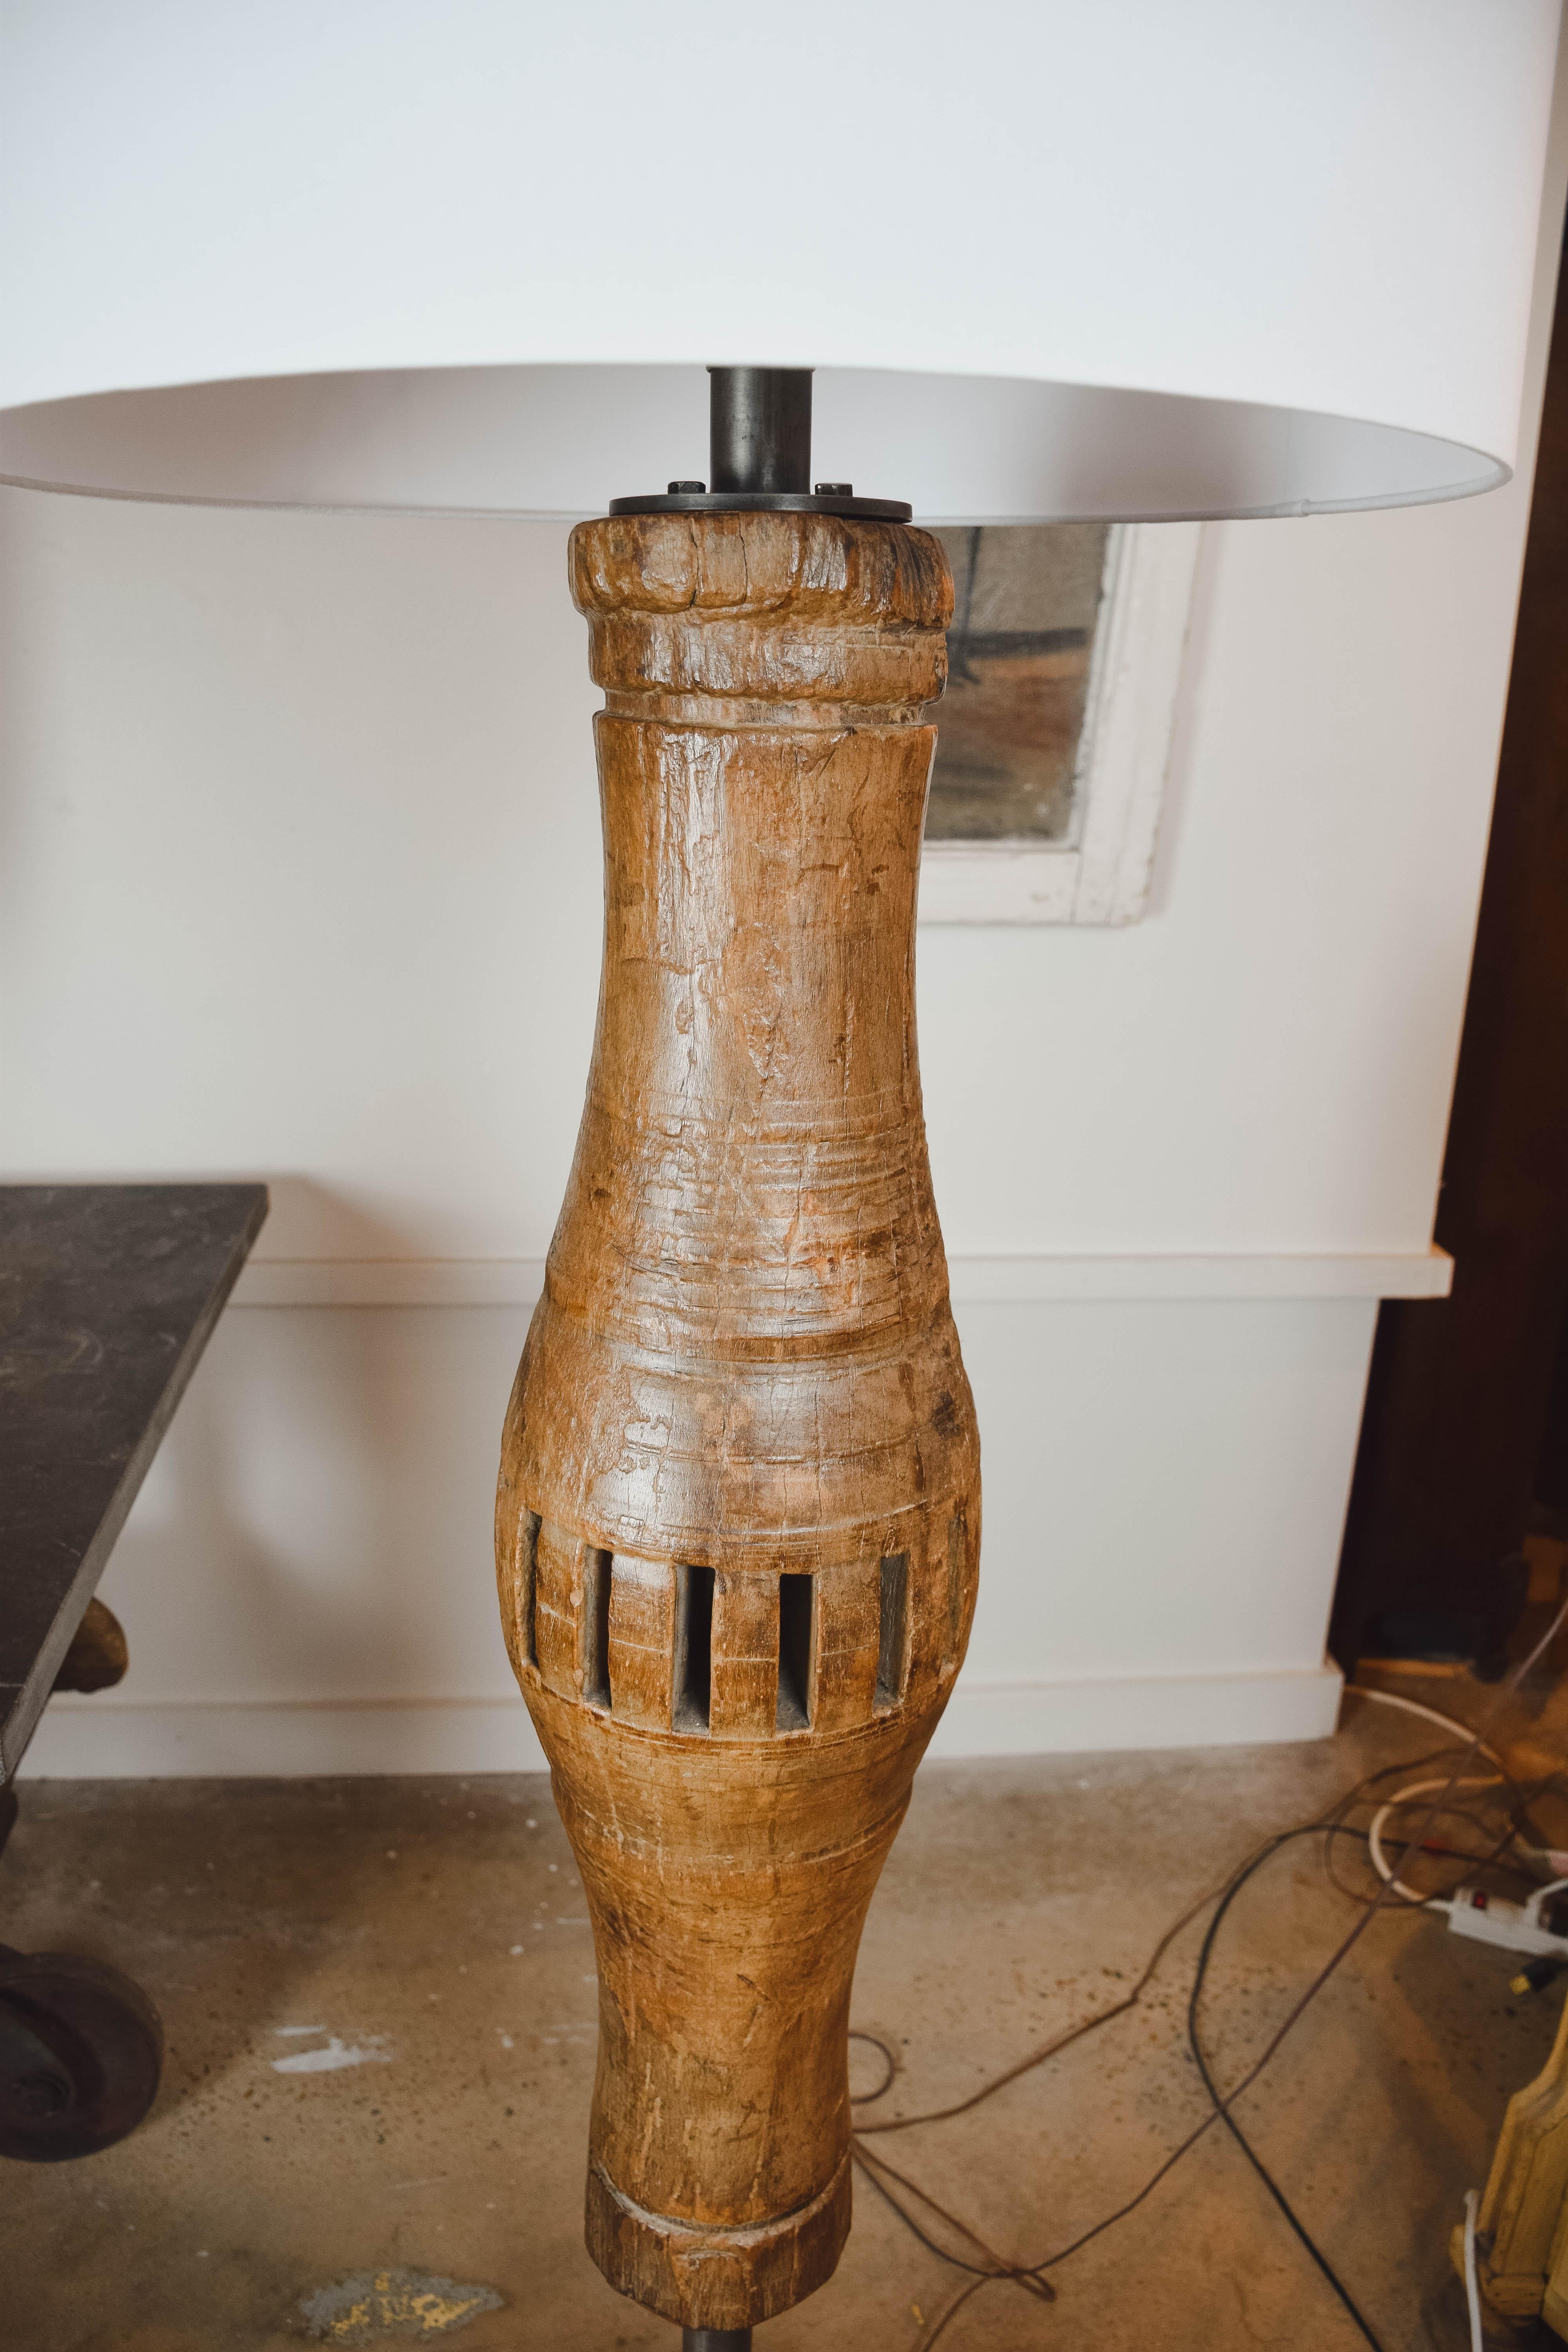 This antique tambour with beautiful deep aged wood patina has been repurposed into a wonderful floor lamp with shade.

Measures: Overall height without shade is 57